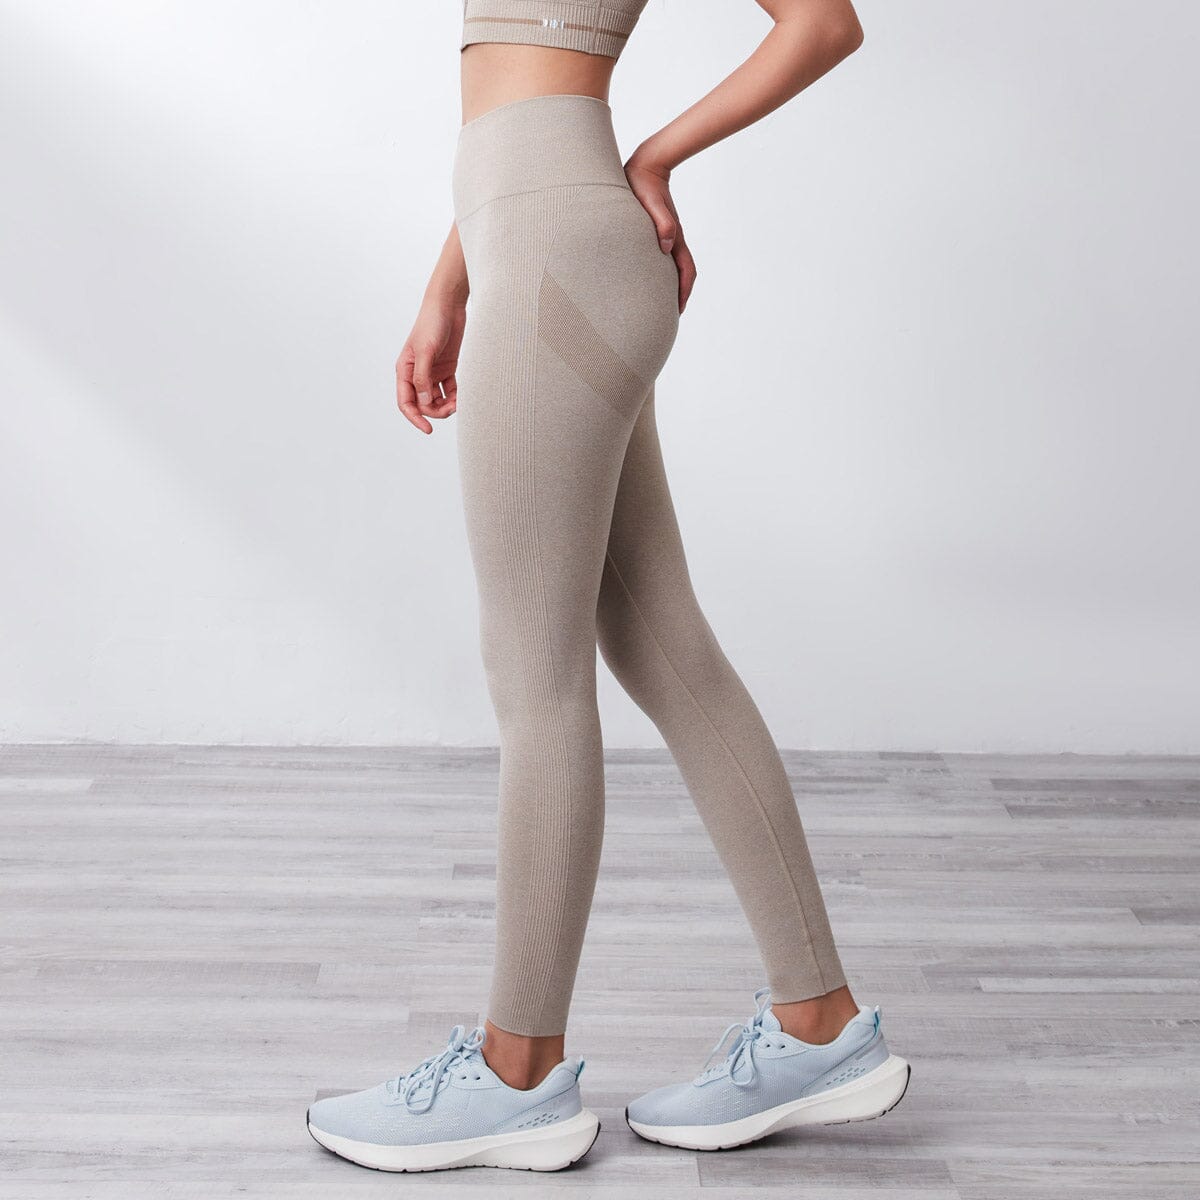 Butt-Sculpting Sustainable Seamless Knit High-Waist Cropped Petite Sports Leggings Leggings Her own words SPORTS 